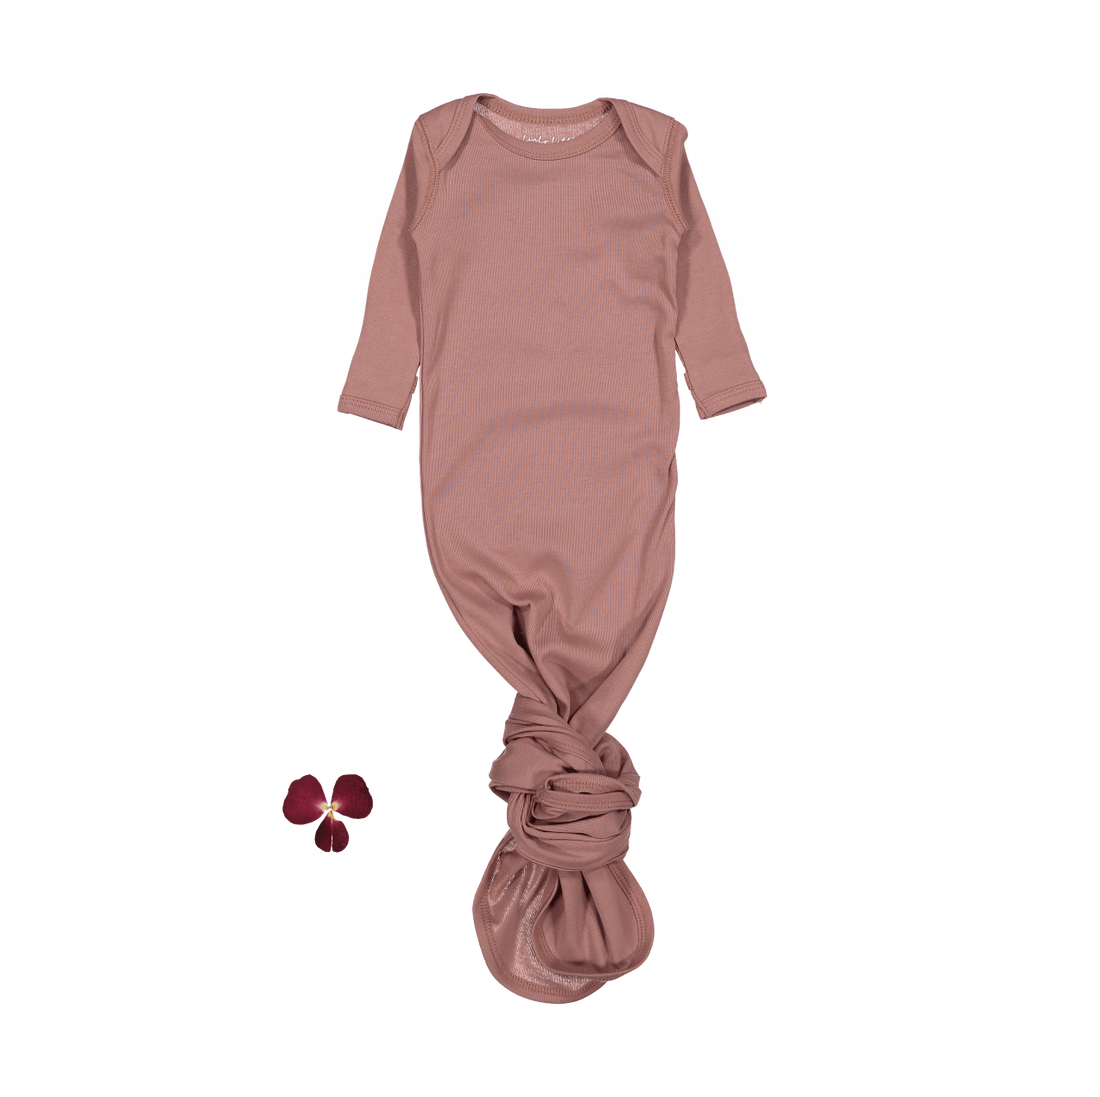 The Baby Gown - Rosewood